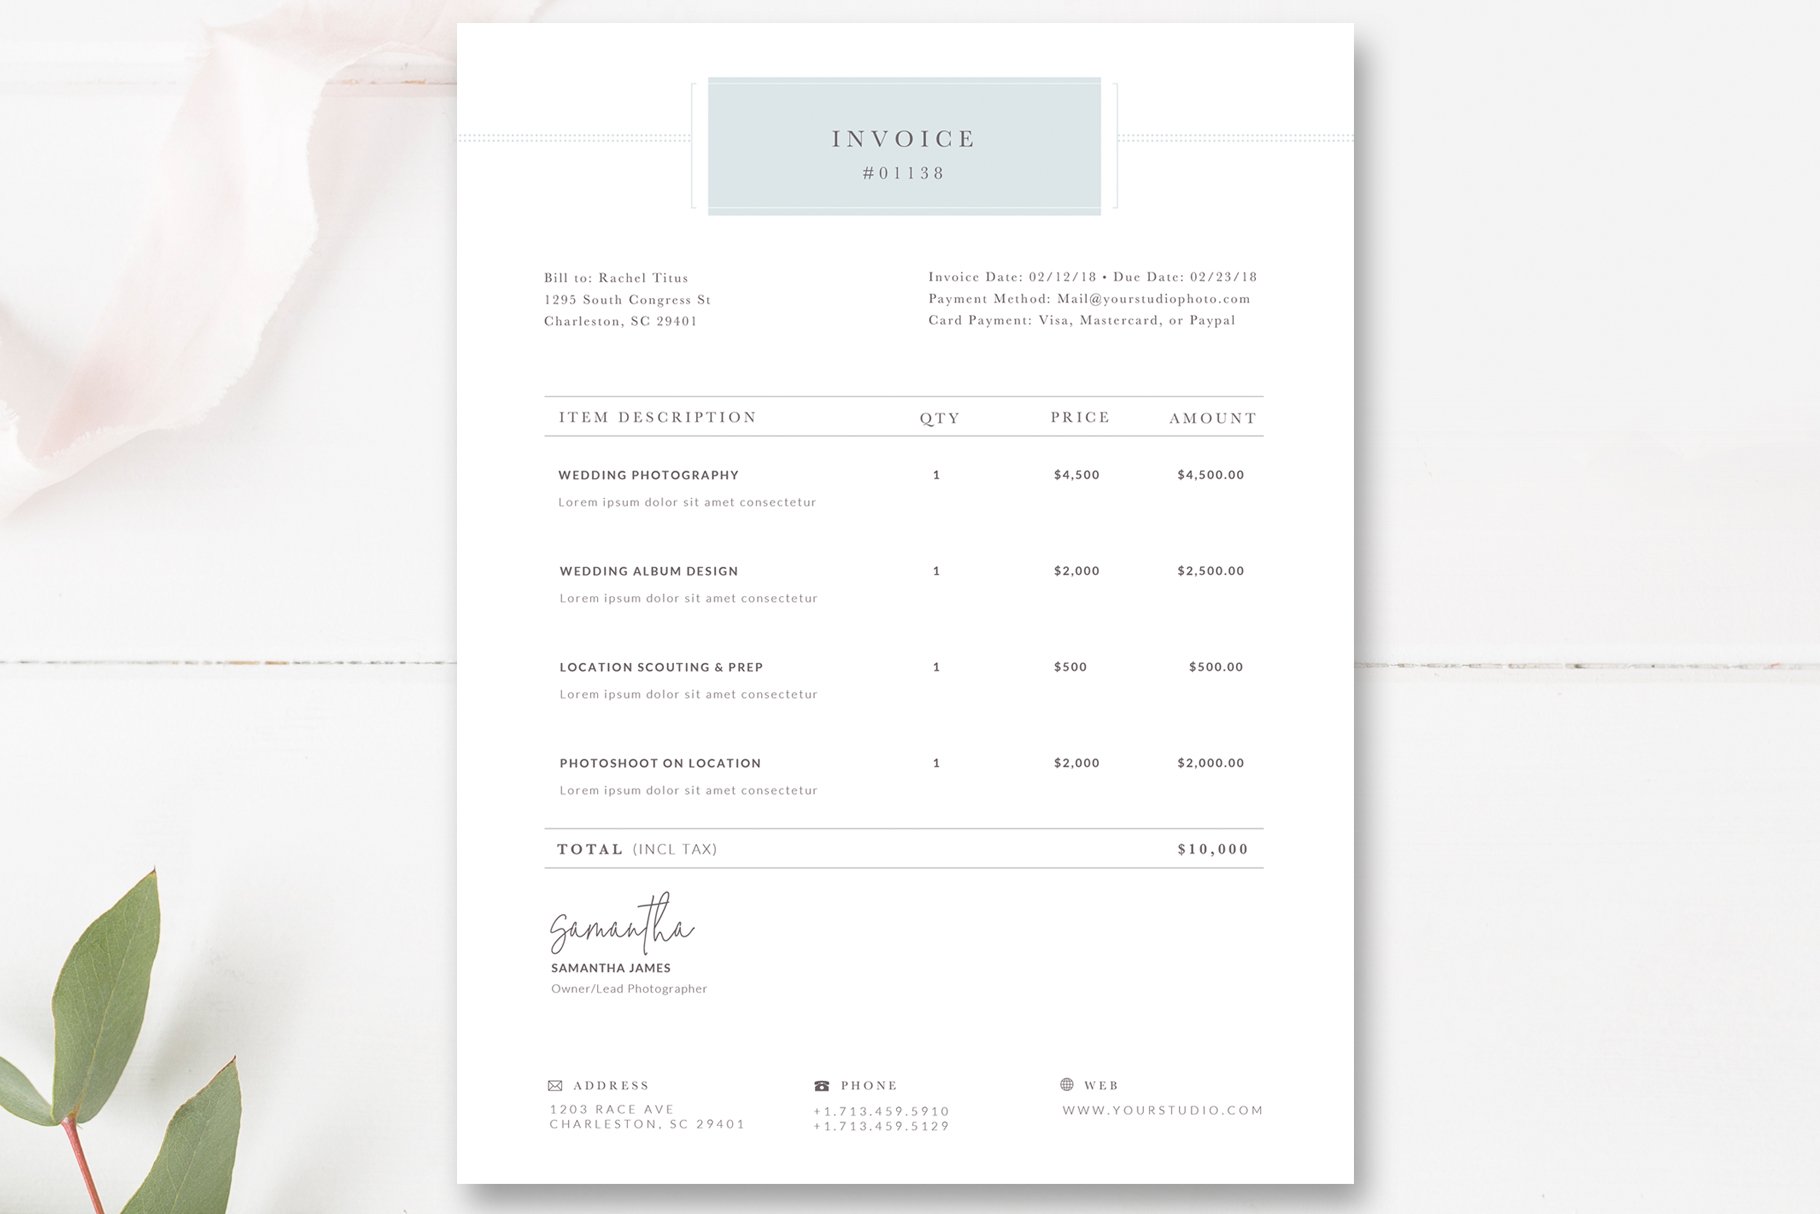 Invoice Receipt for Photographers preview image.